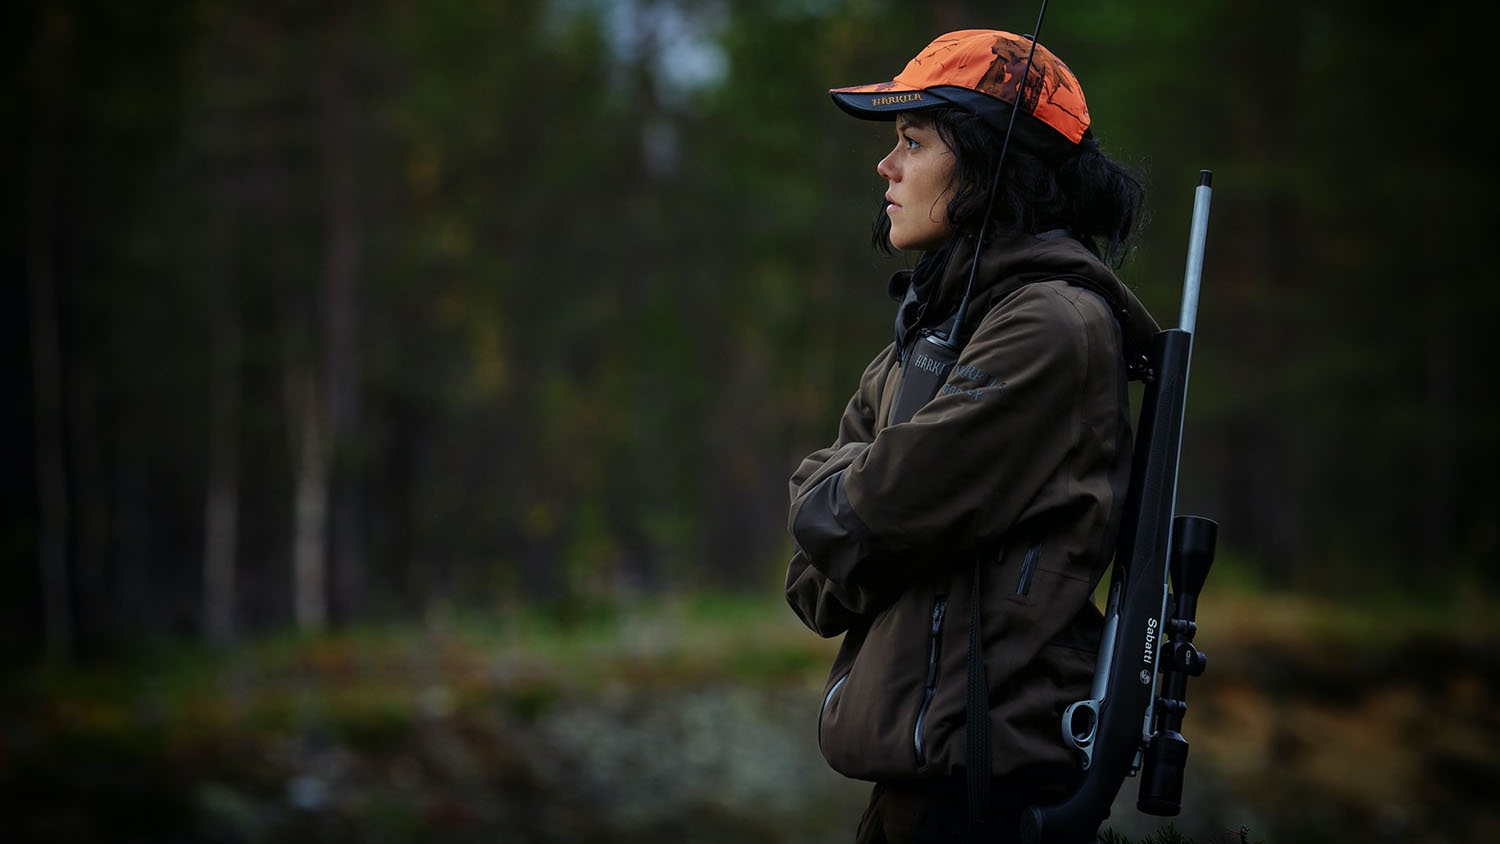 woman in hunting attire stands with rifle